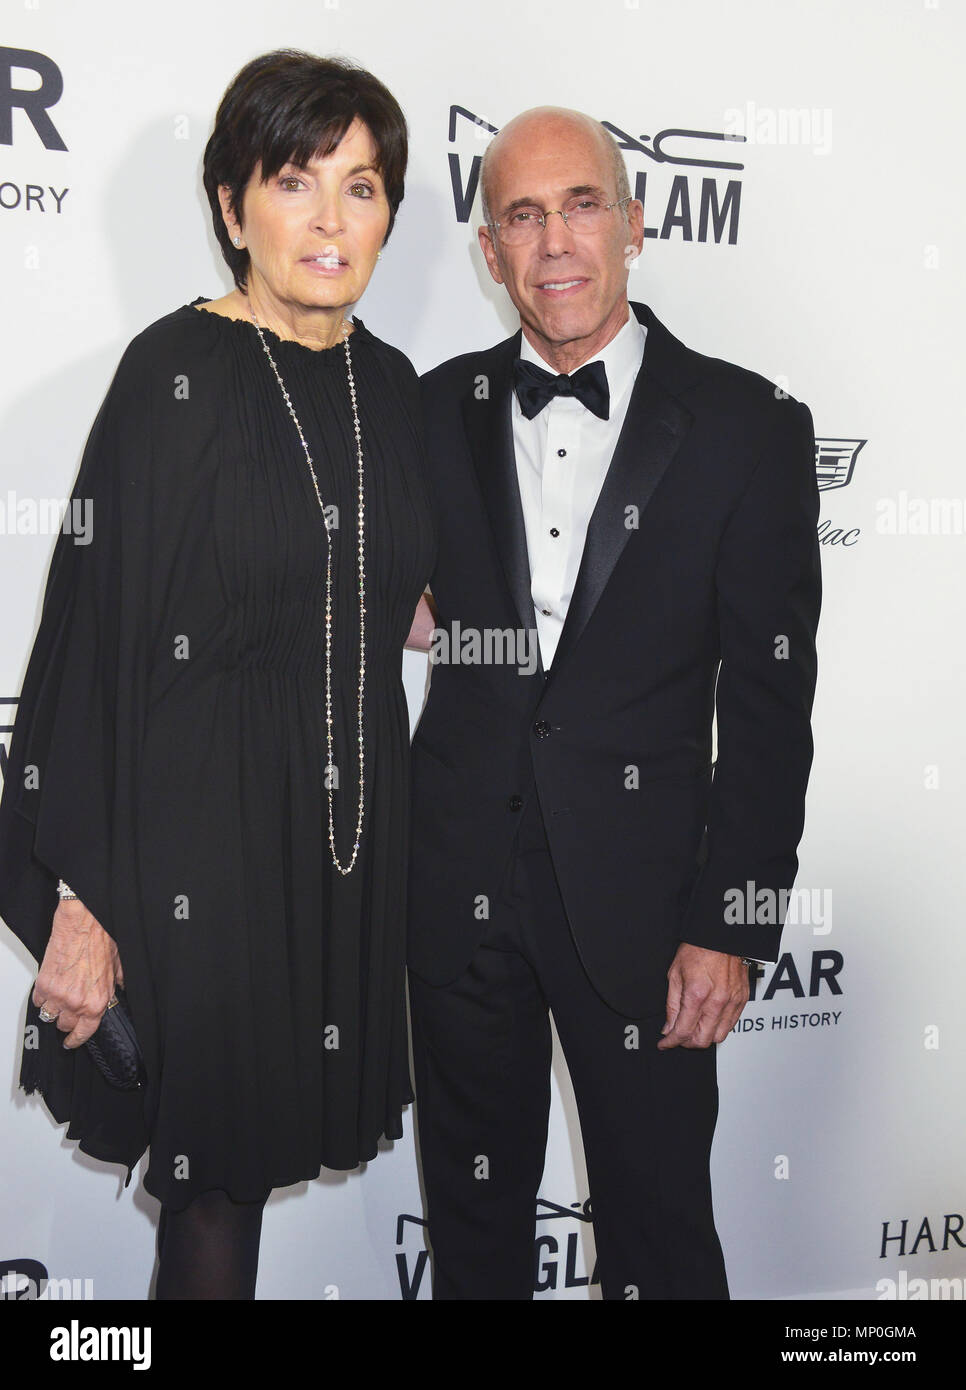 Jeffrey Katzenberg , Wife Marilyn  at the amfAR's Inspiration Gala Los Angeles at Milk Studios in Los Angeles. October 27, 2016.Jeffrey Katzenberg , Wife Marilyn  ------------- Red Carpet Event, Vertical, USA, Film Industry, Celebrities,  Photography, Bestof, Arts Culture and Entertainment, Topix Celebrities fashion /  Vertical, Best of, Event in Hollywood Life - California,  Red Carpet and backstage, USA, Film Industry, Celebrities,  movie celebrities, TV celebrities, Music celebrities, Photography, Bestof, Arts Culture and Entertainment,  Topix, vertical,  family from from the year , 2016, i Stock Photo